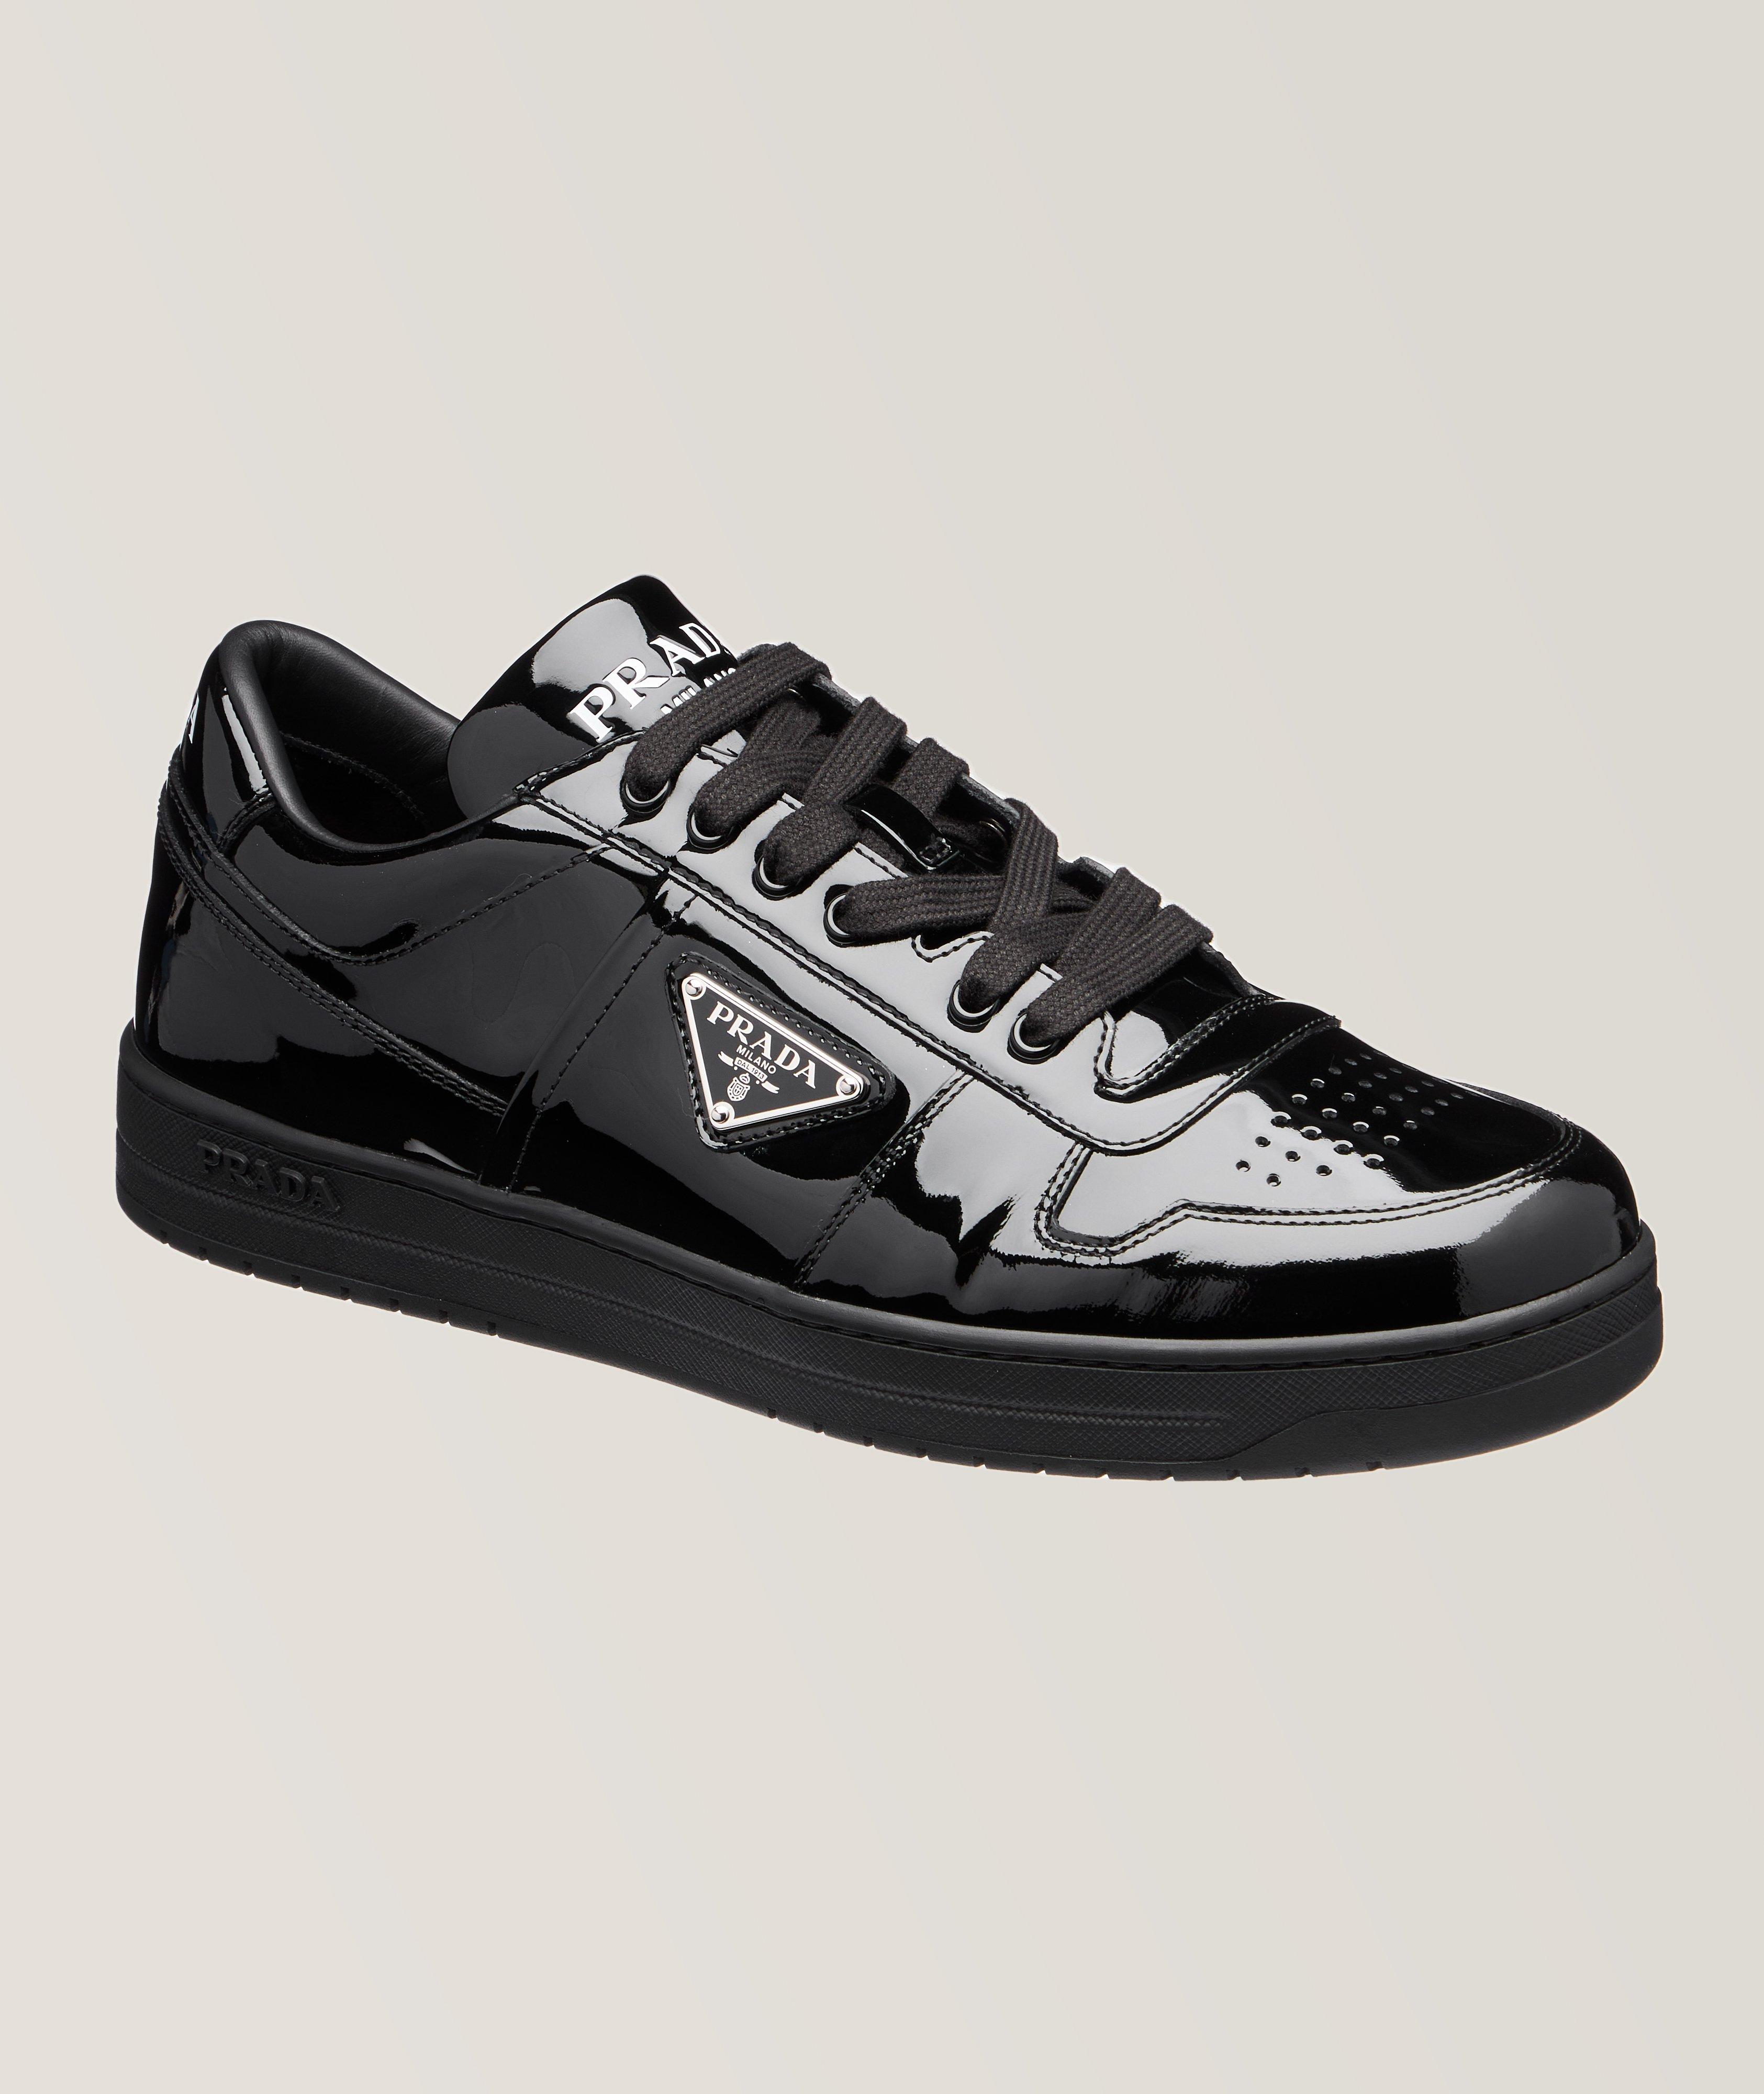 Downtown Shined Leather Sneakers image 0